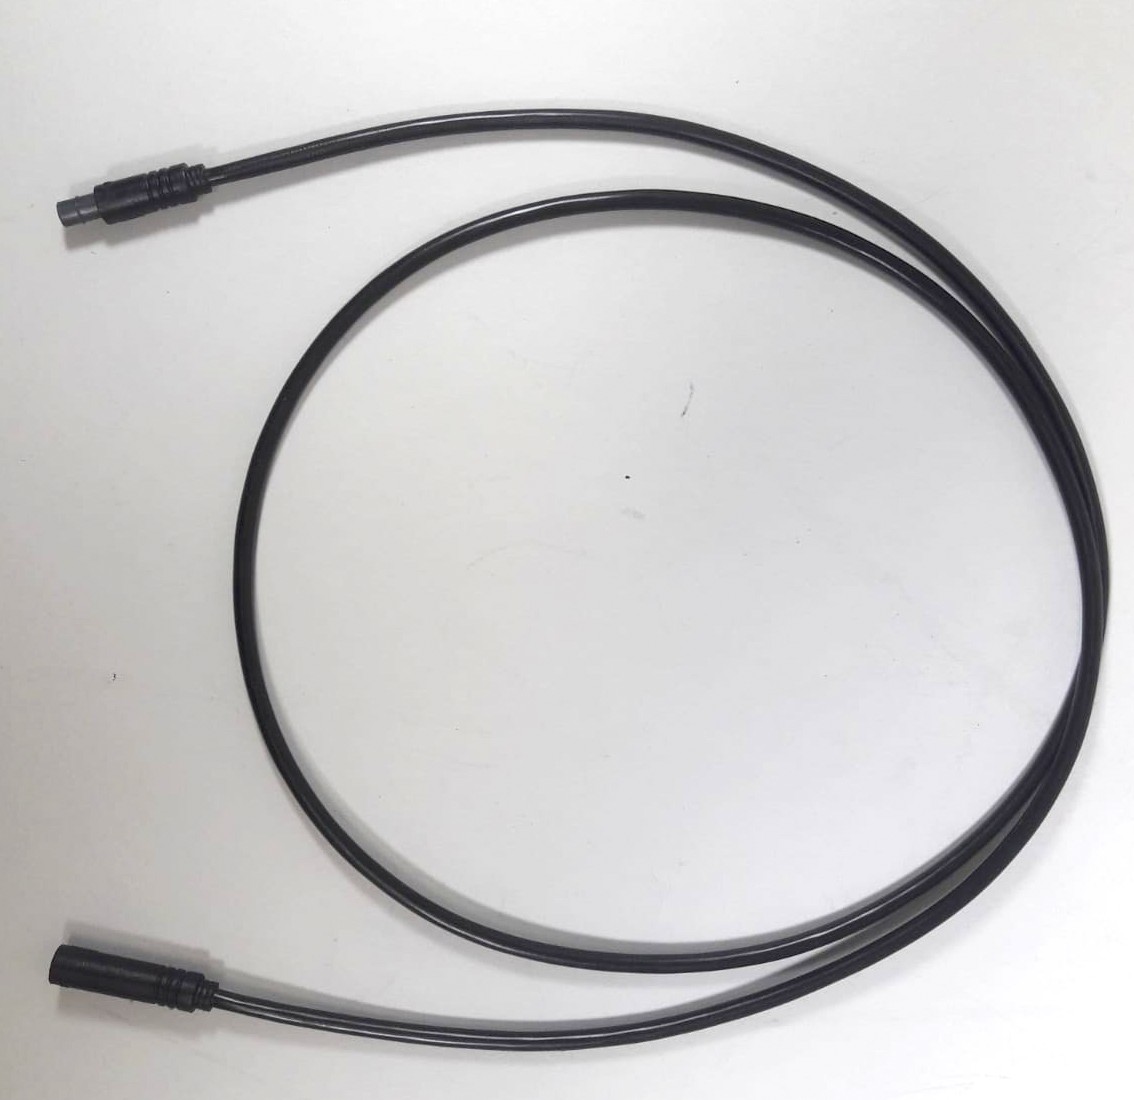 Tongsheng extension cable 1100 mm display 6-pins